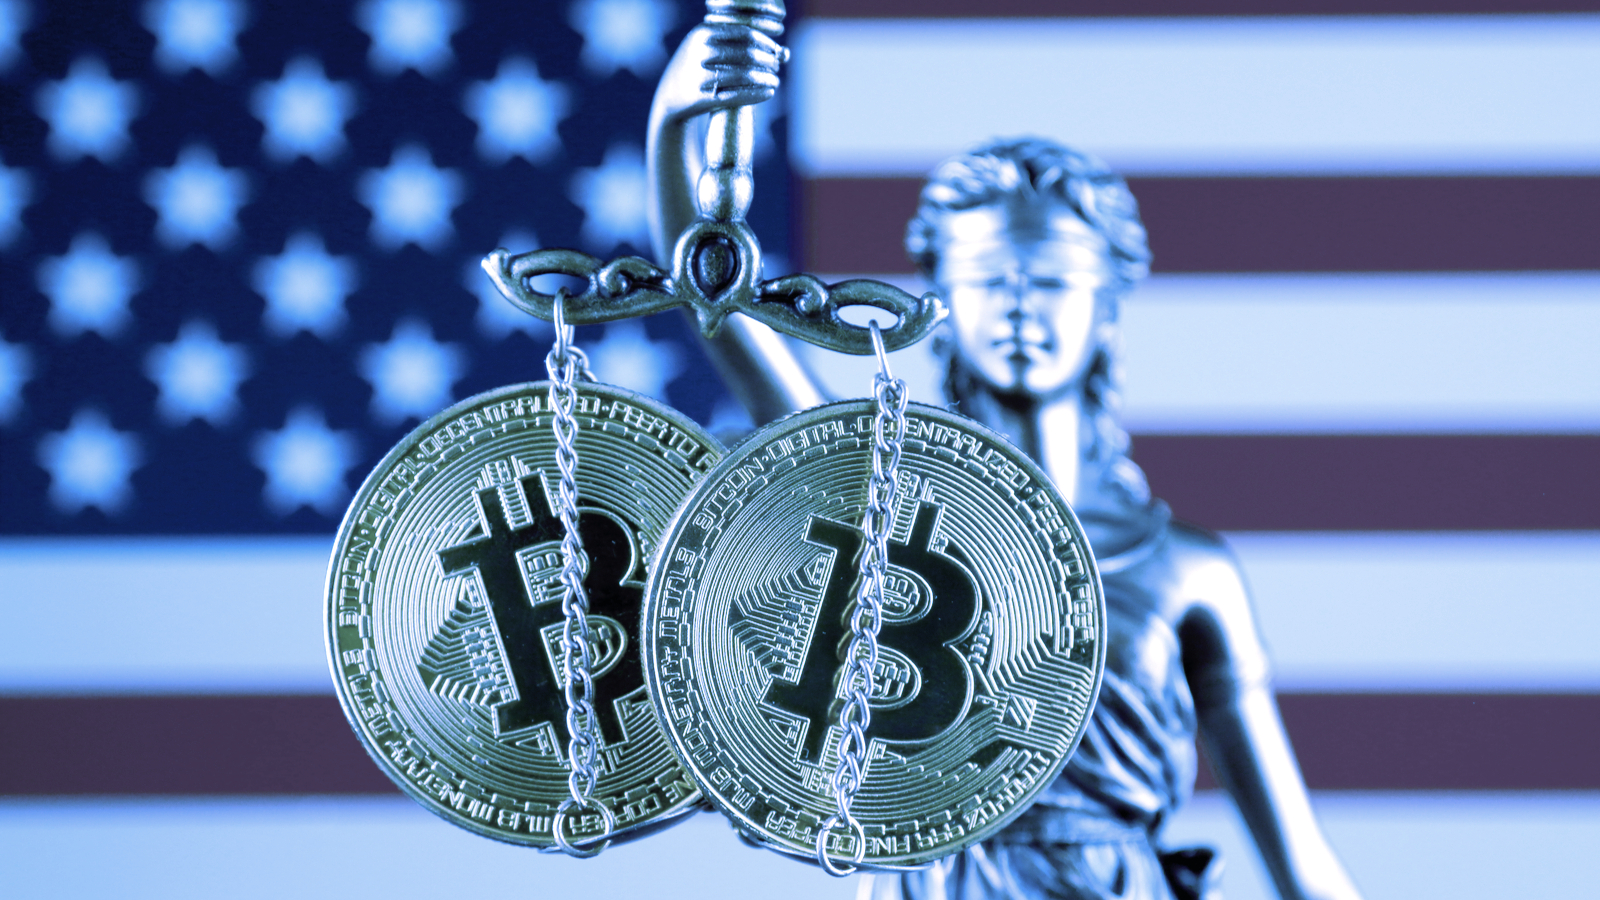 Regulators in the United States double down on crypto policy focus. Image: Shutterstock